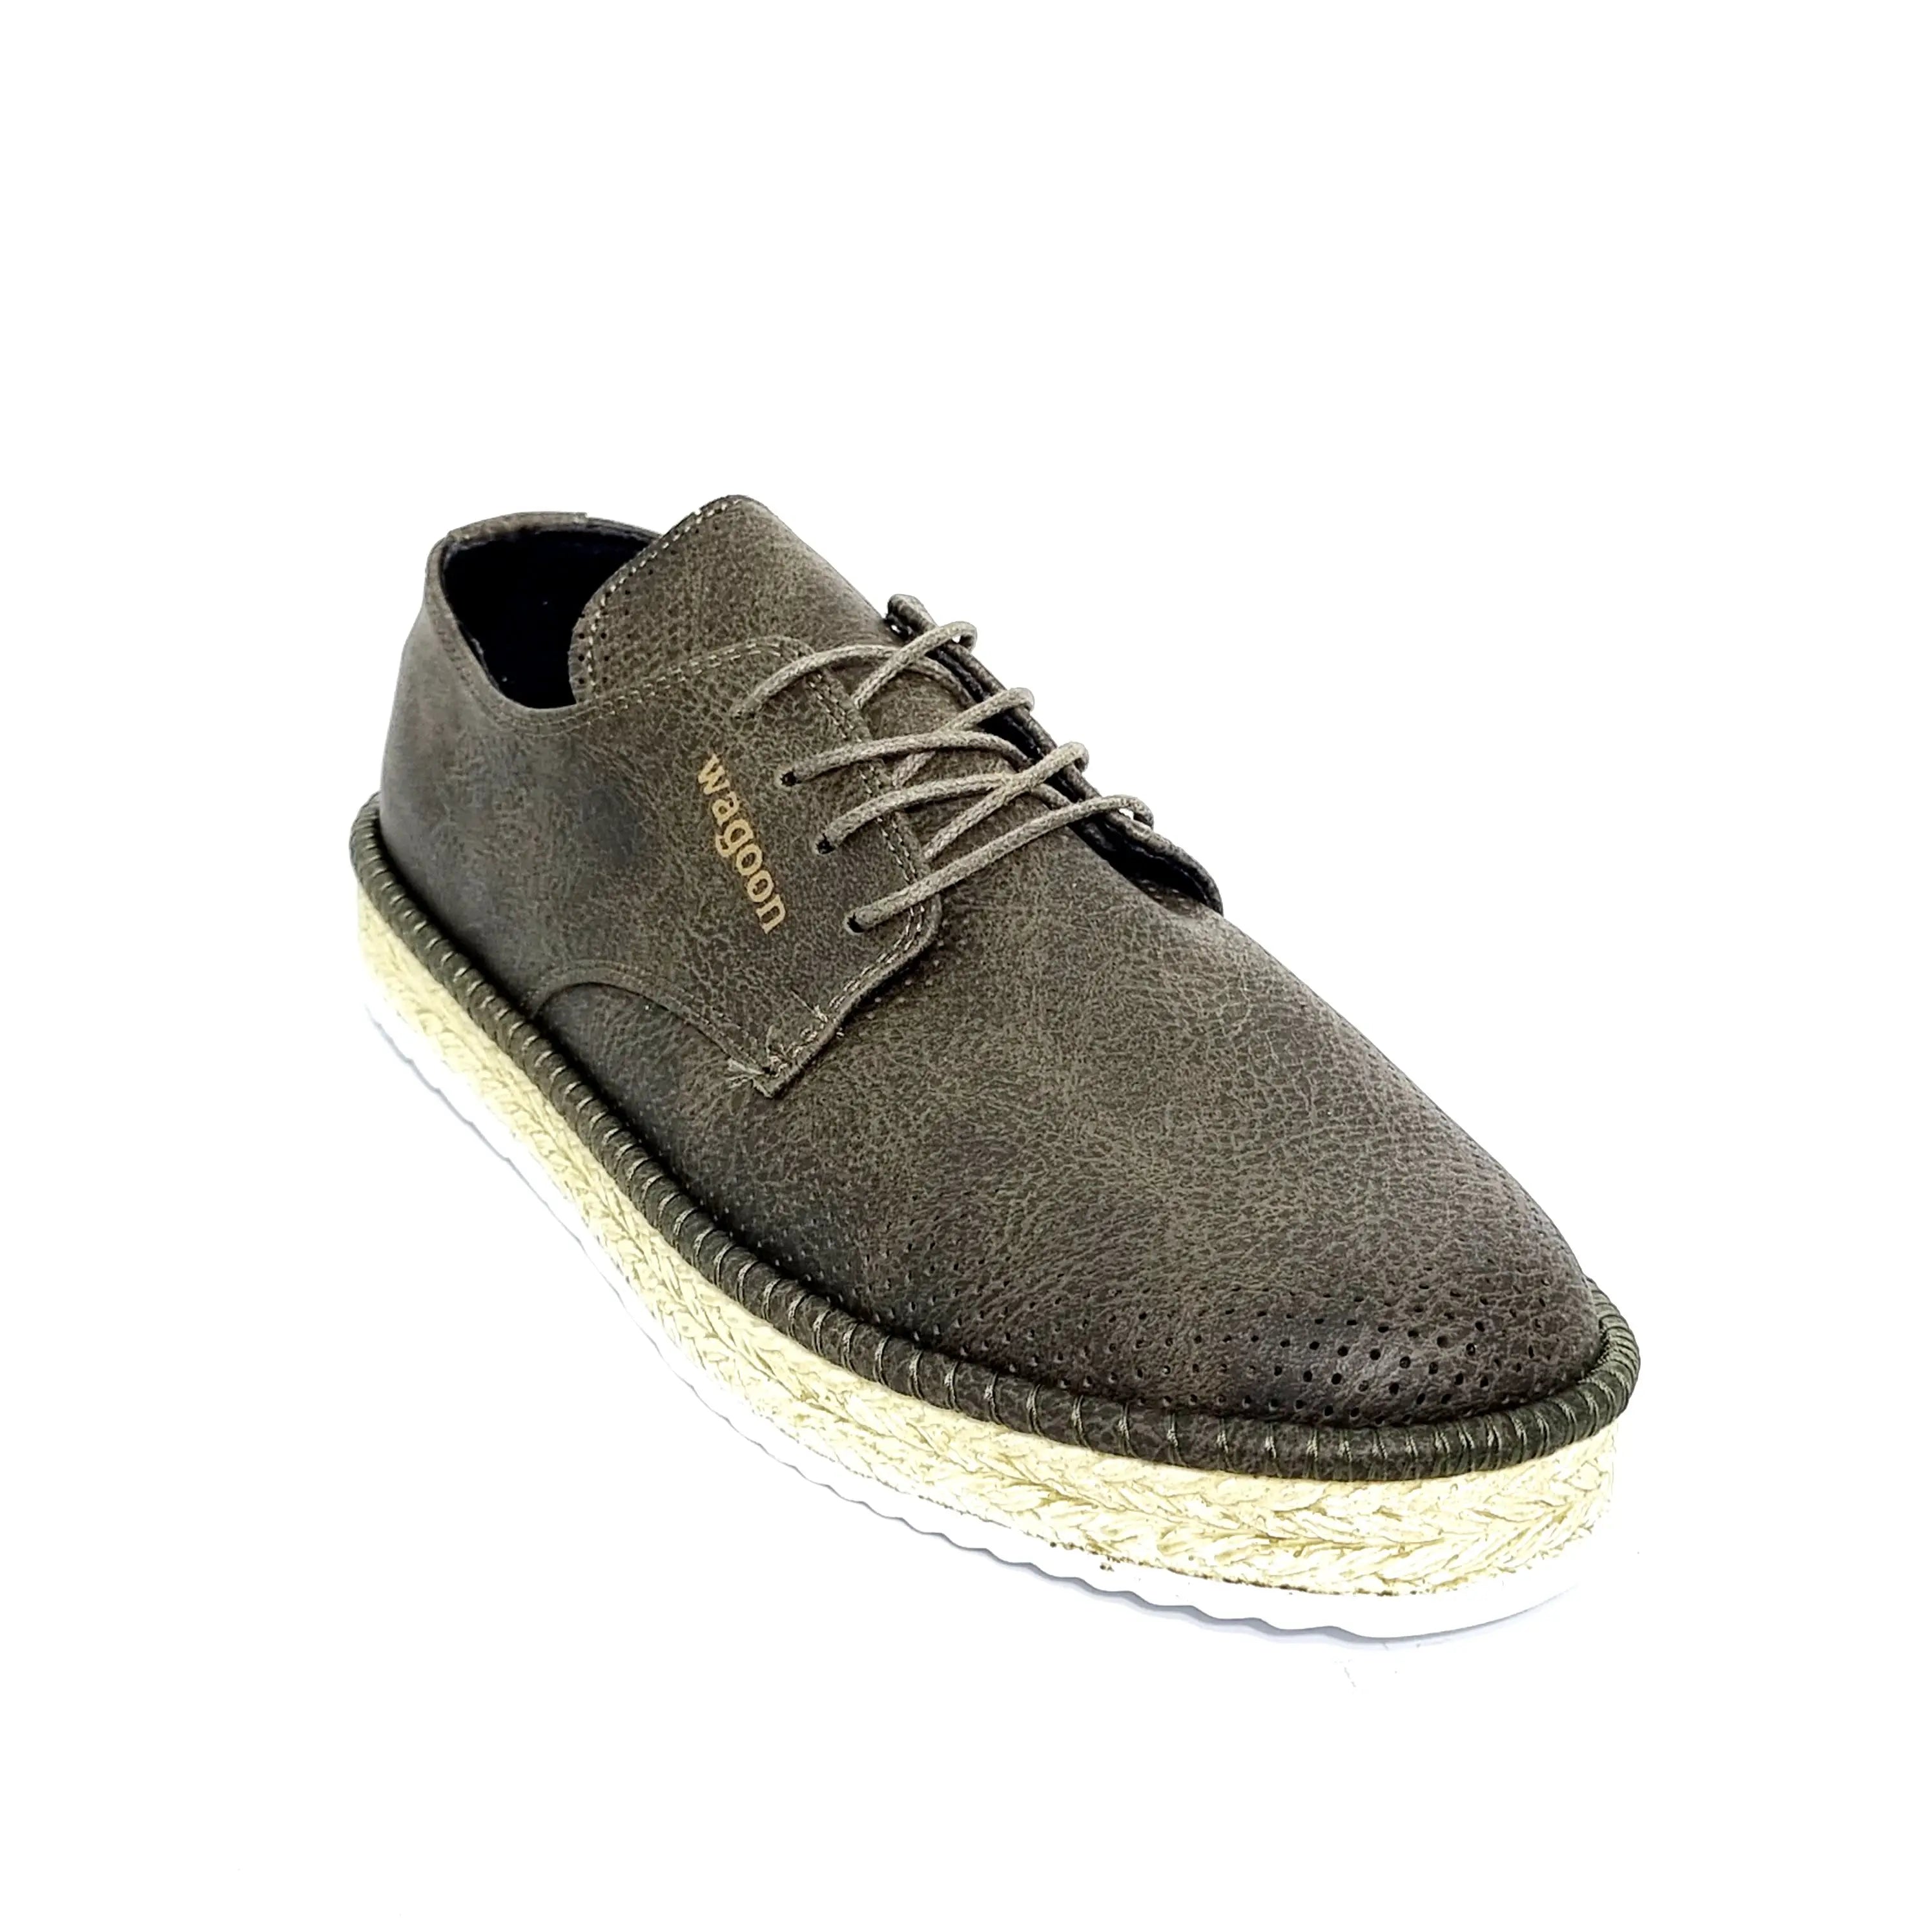 WAGOON 012 OLIVE Sneakers | familyshoecentre